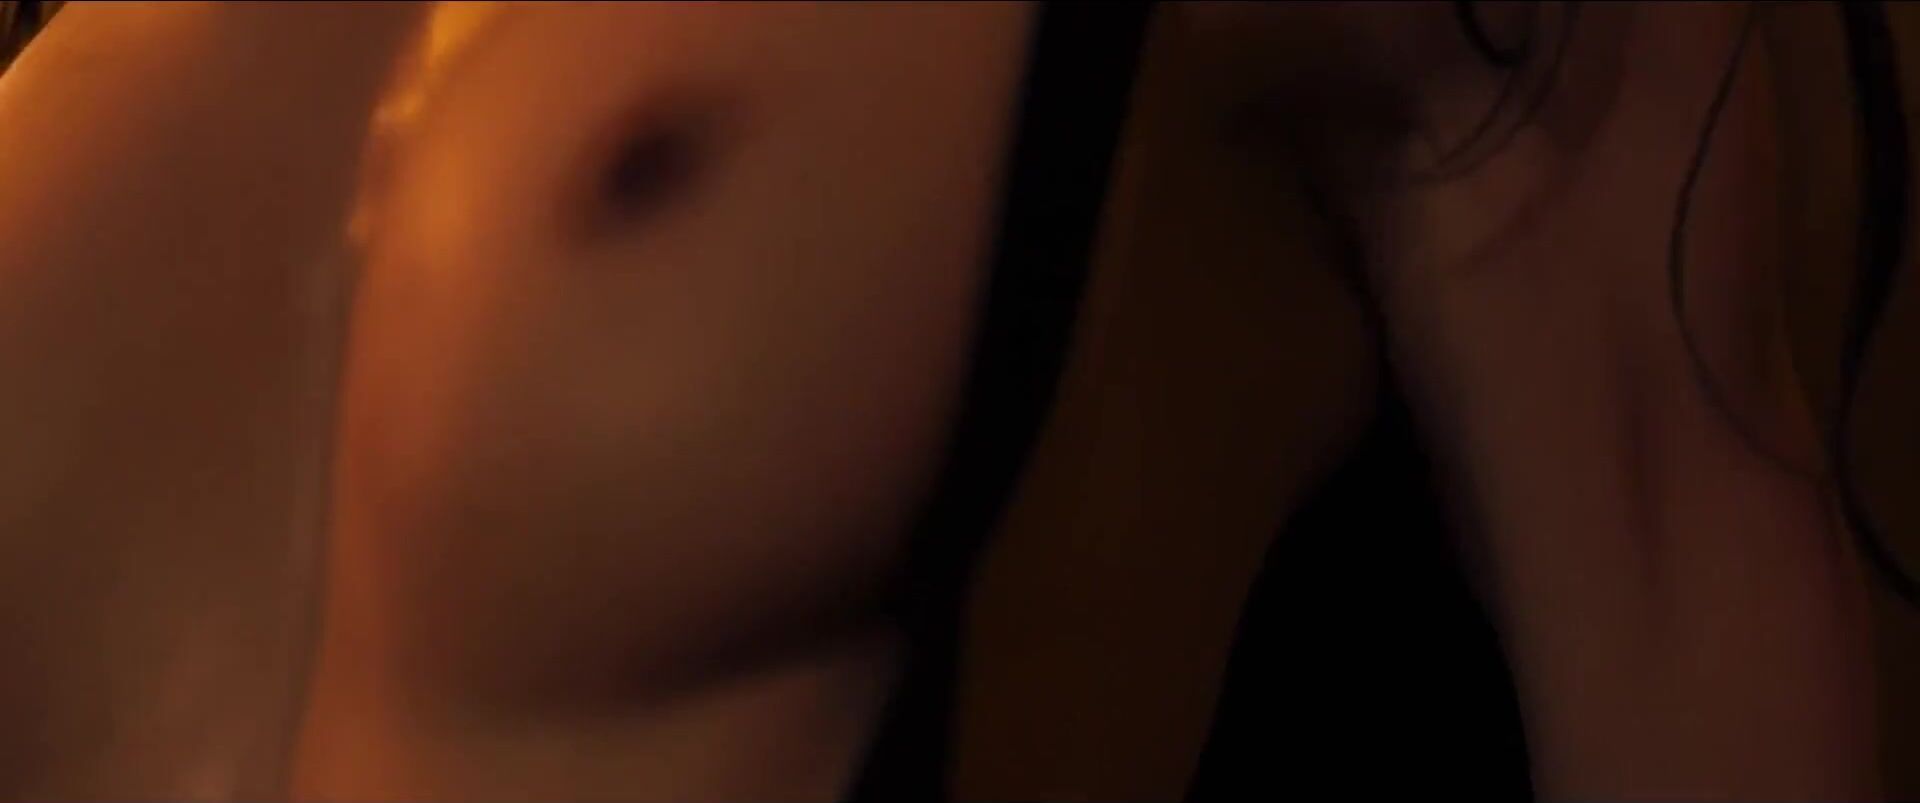 American Lesbian sex scene and striptease by windows from horror movie Trauma (2017) Perverted